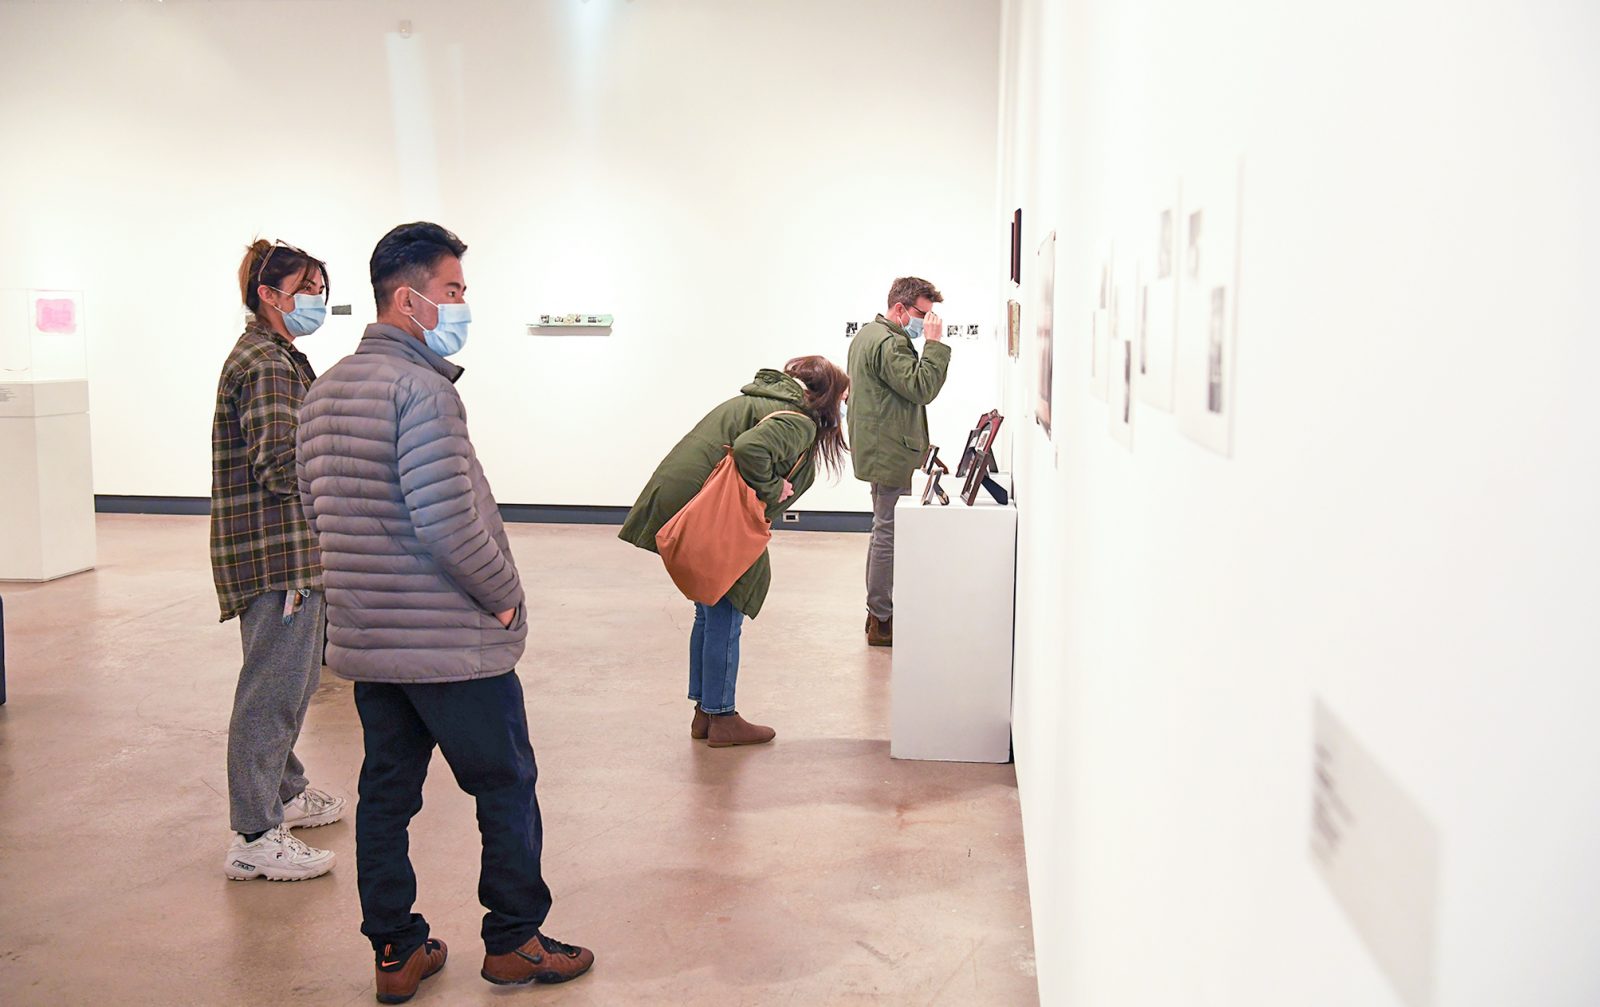 Four individuals in an open art gallery examining photographs put up on white walls.